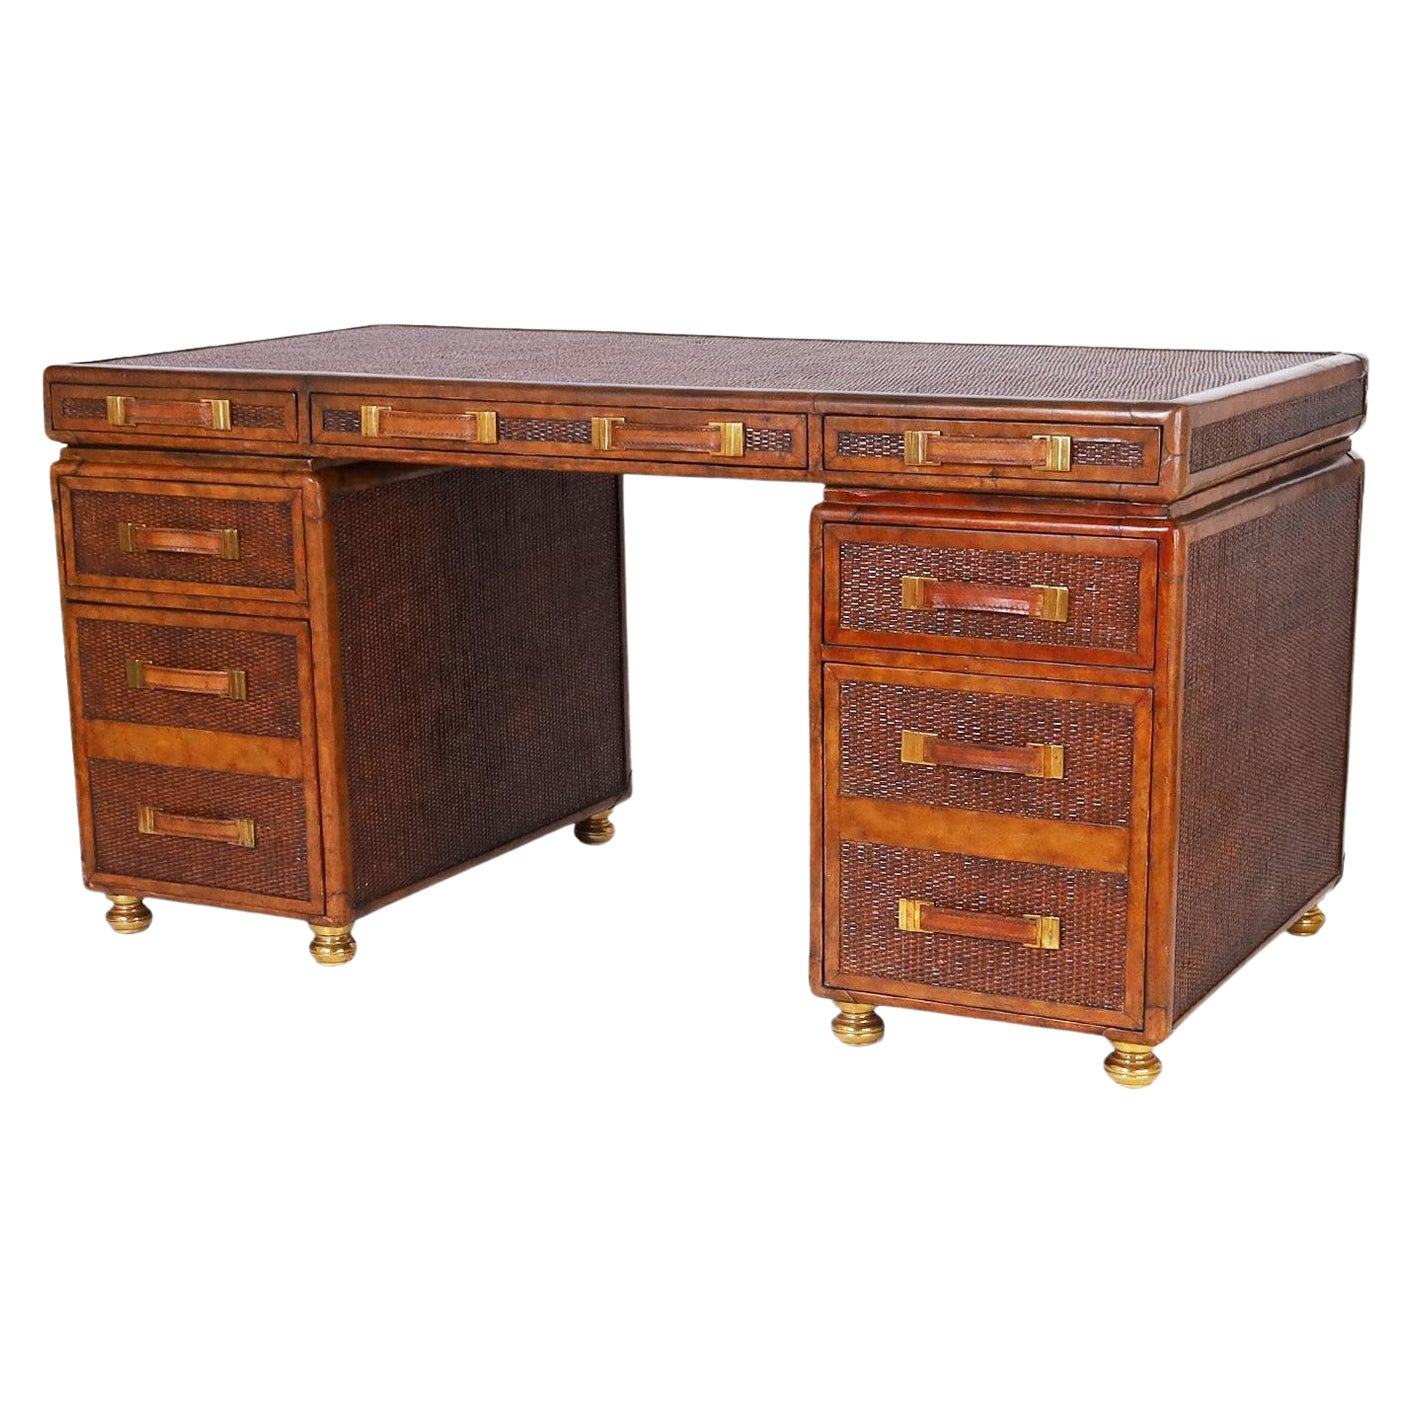 British Colonial Style Grasscloth and Mahogany Desk